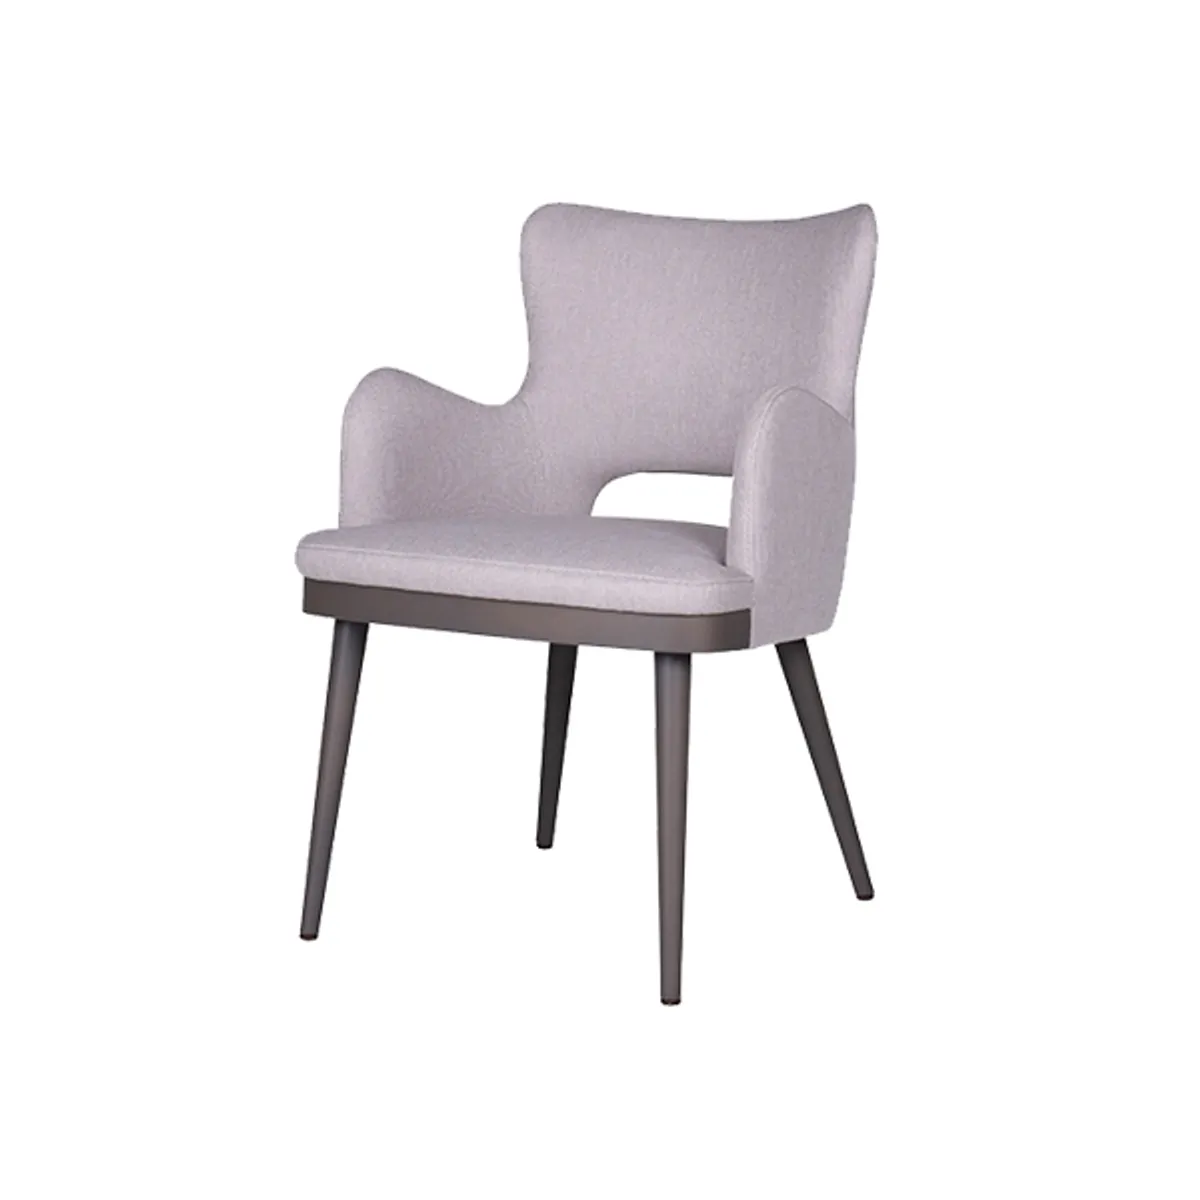 Kelly Flow Peep Armchair Inside Out Contracts